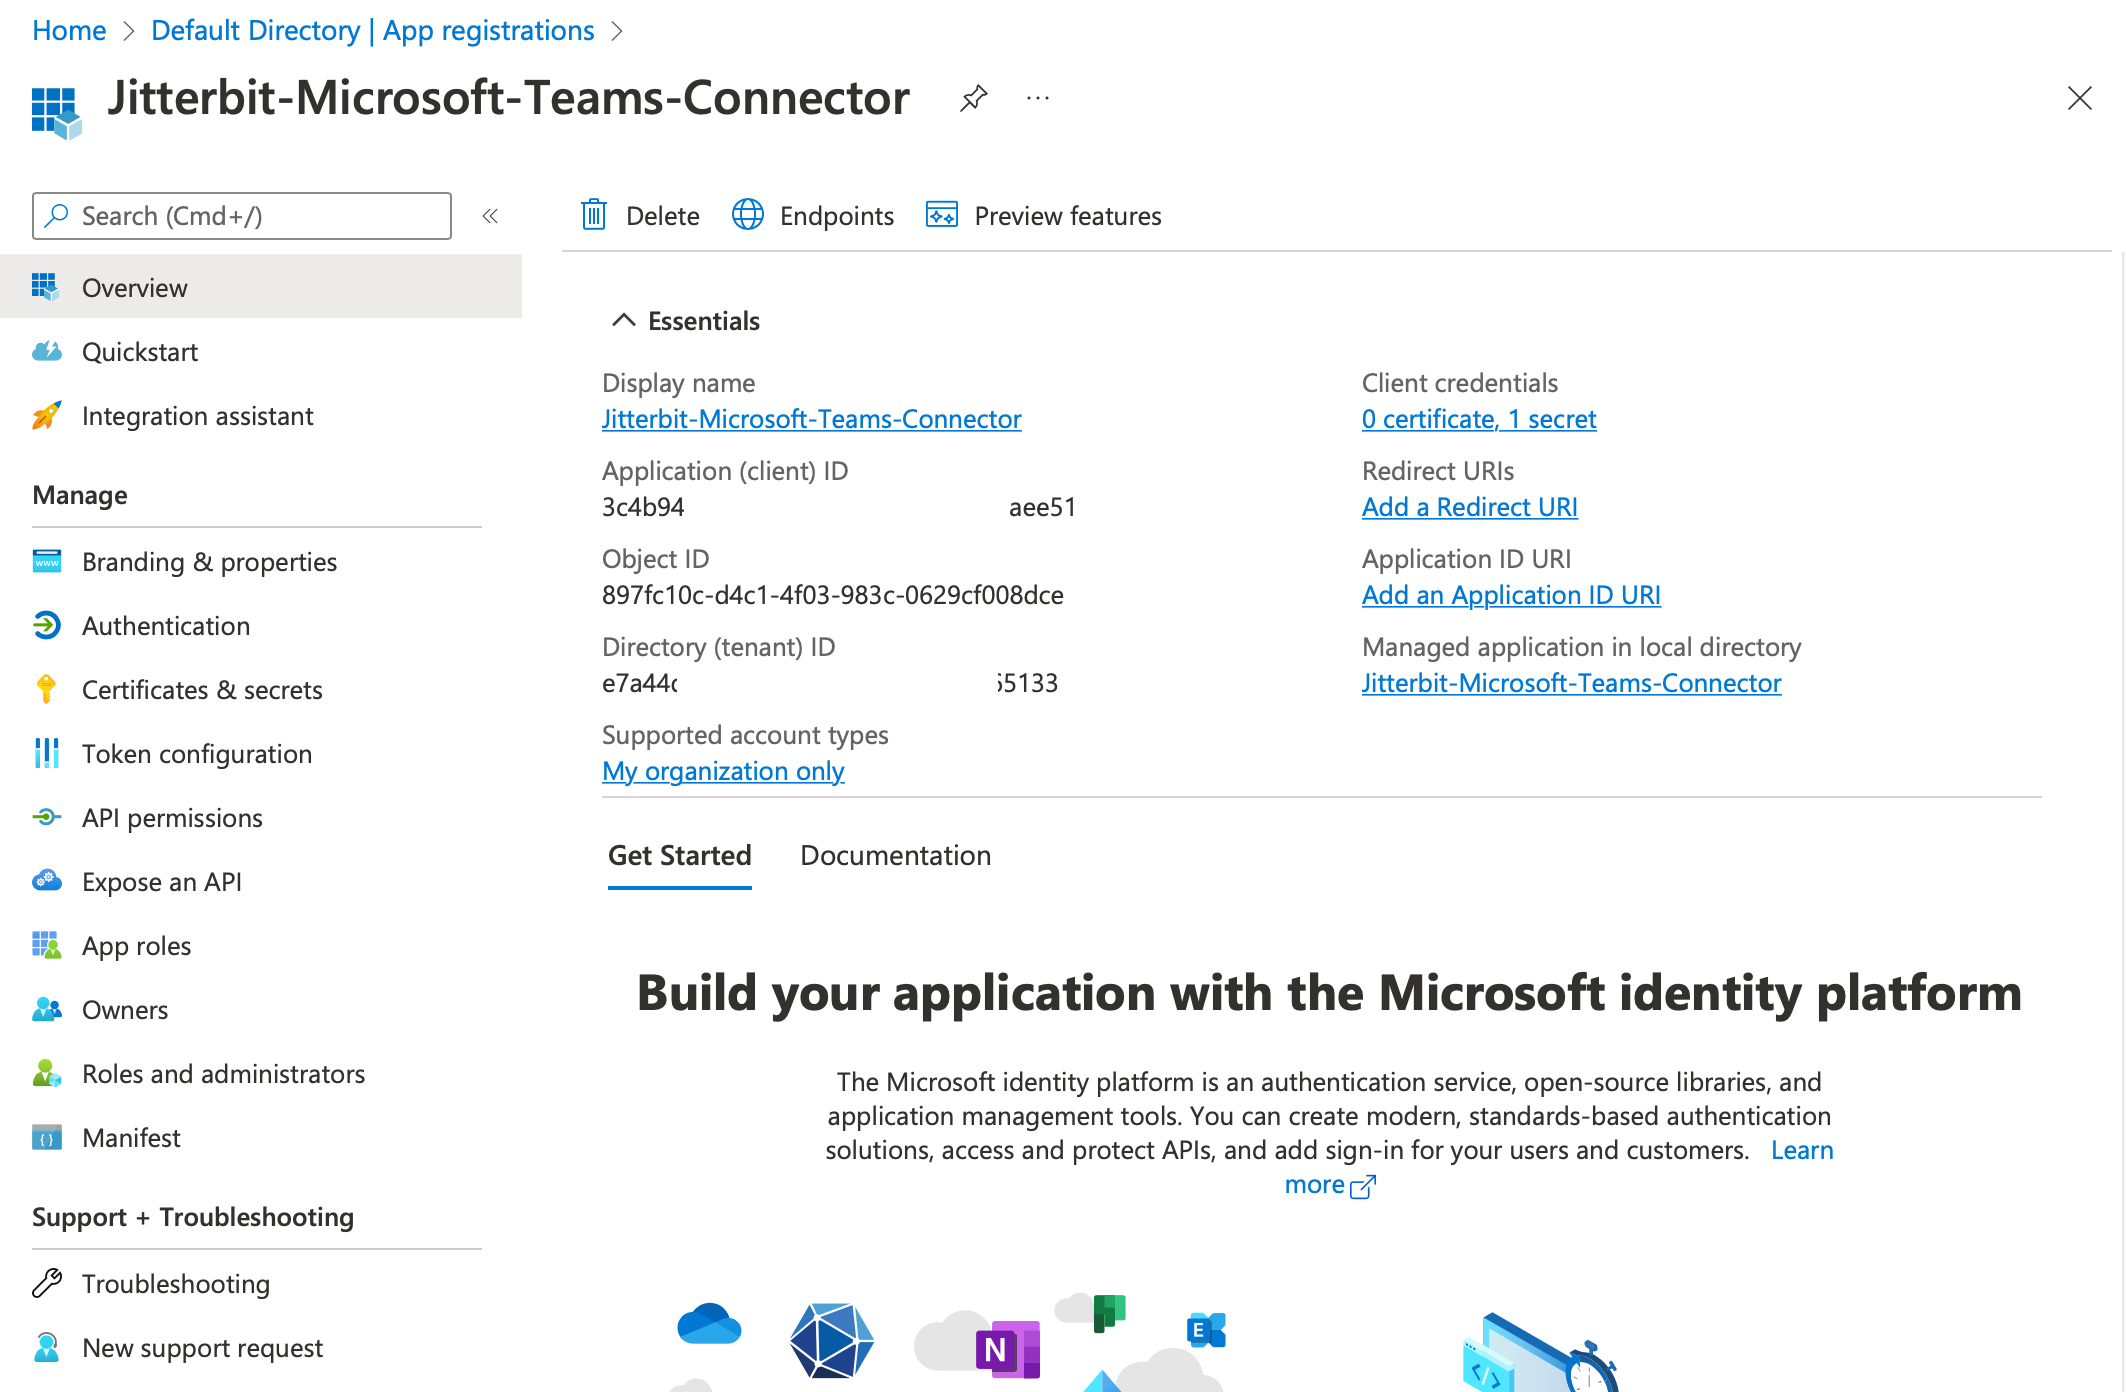 Microsoft application completed registration